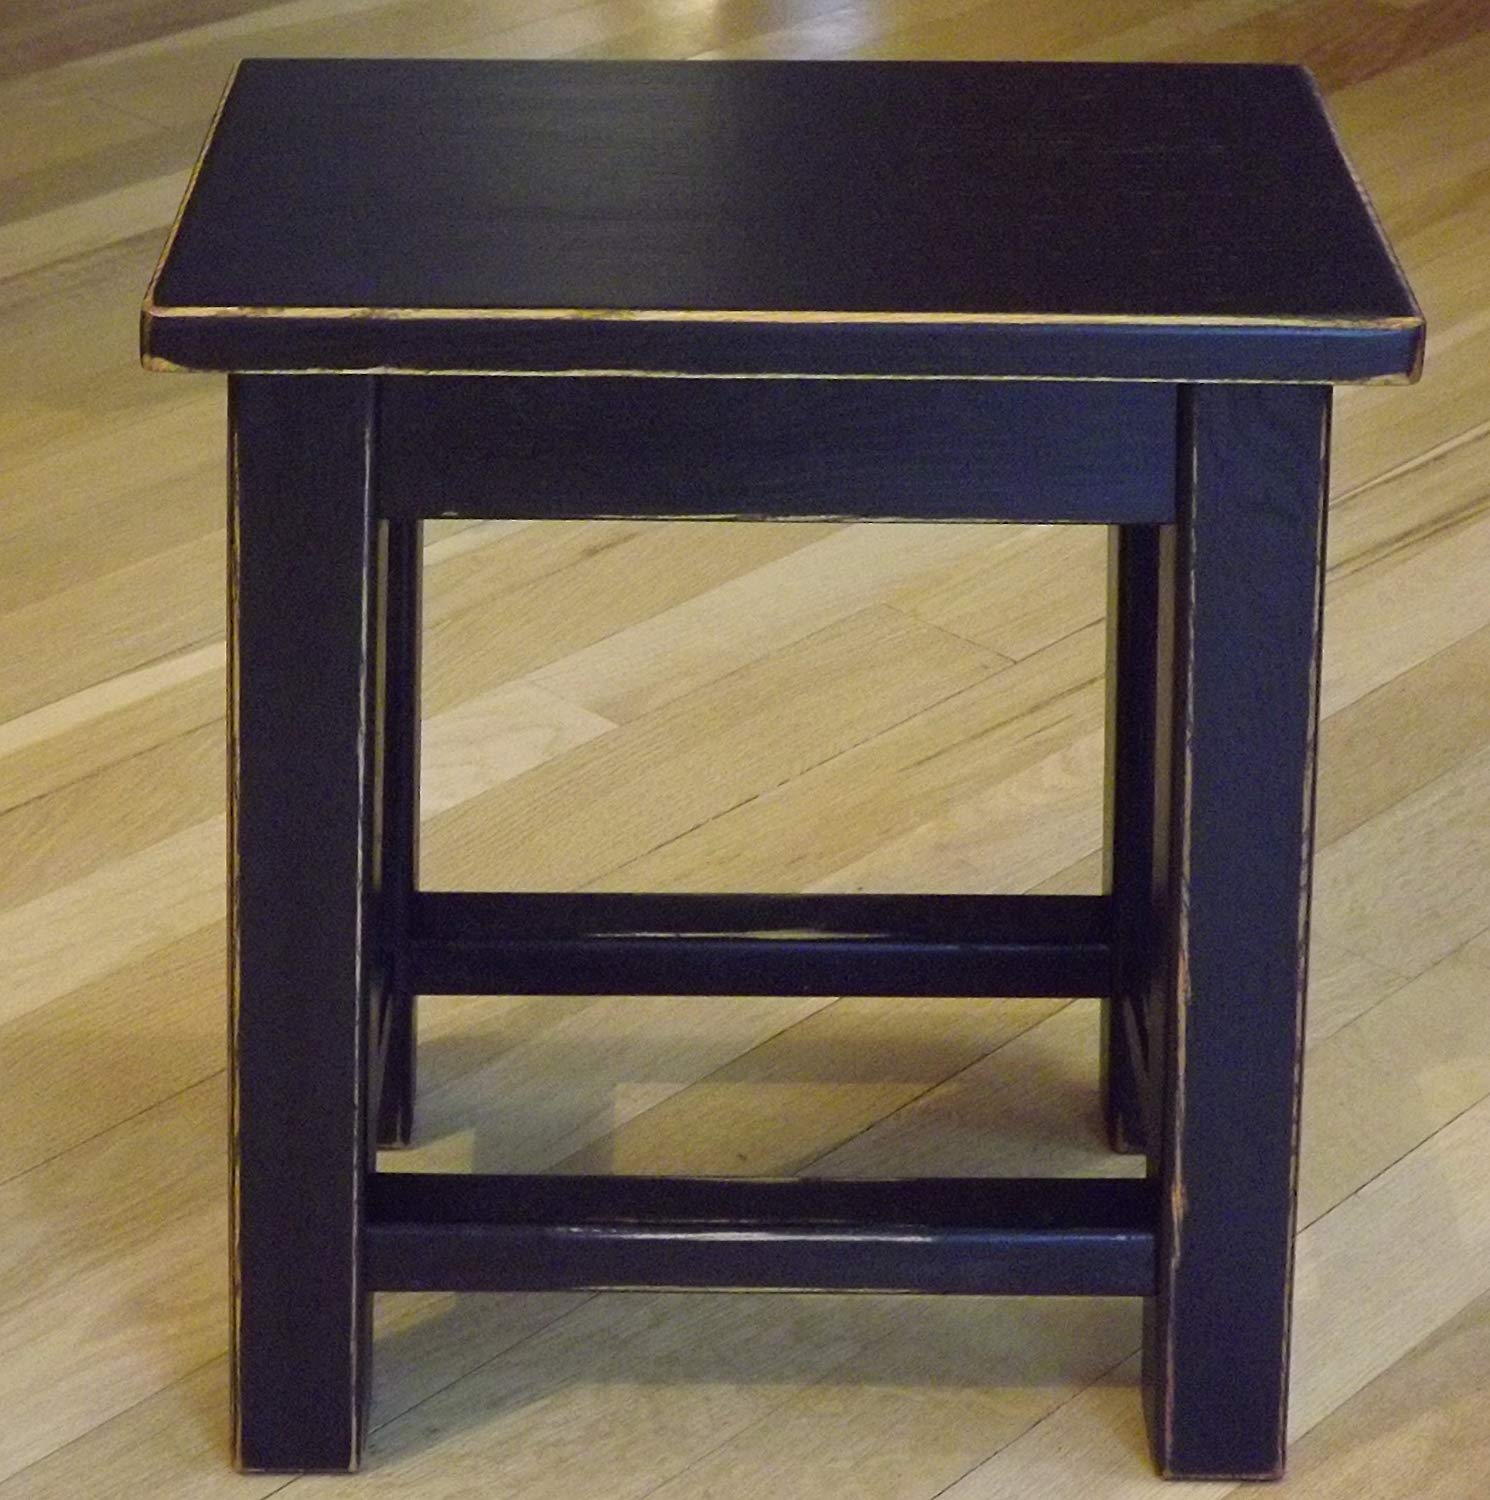 distressed black wood side table small end handmade handcrafted tables ethan allen furniture dubai corey coffee dog crate plans riverside harmony dual kennel lazy boy website teal